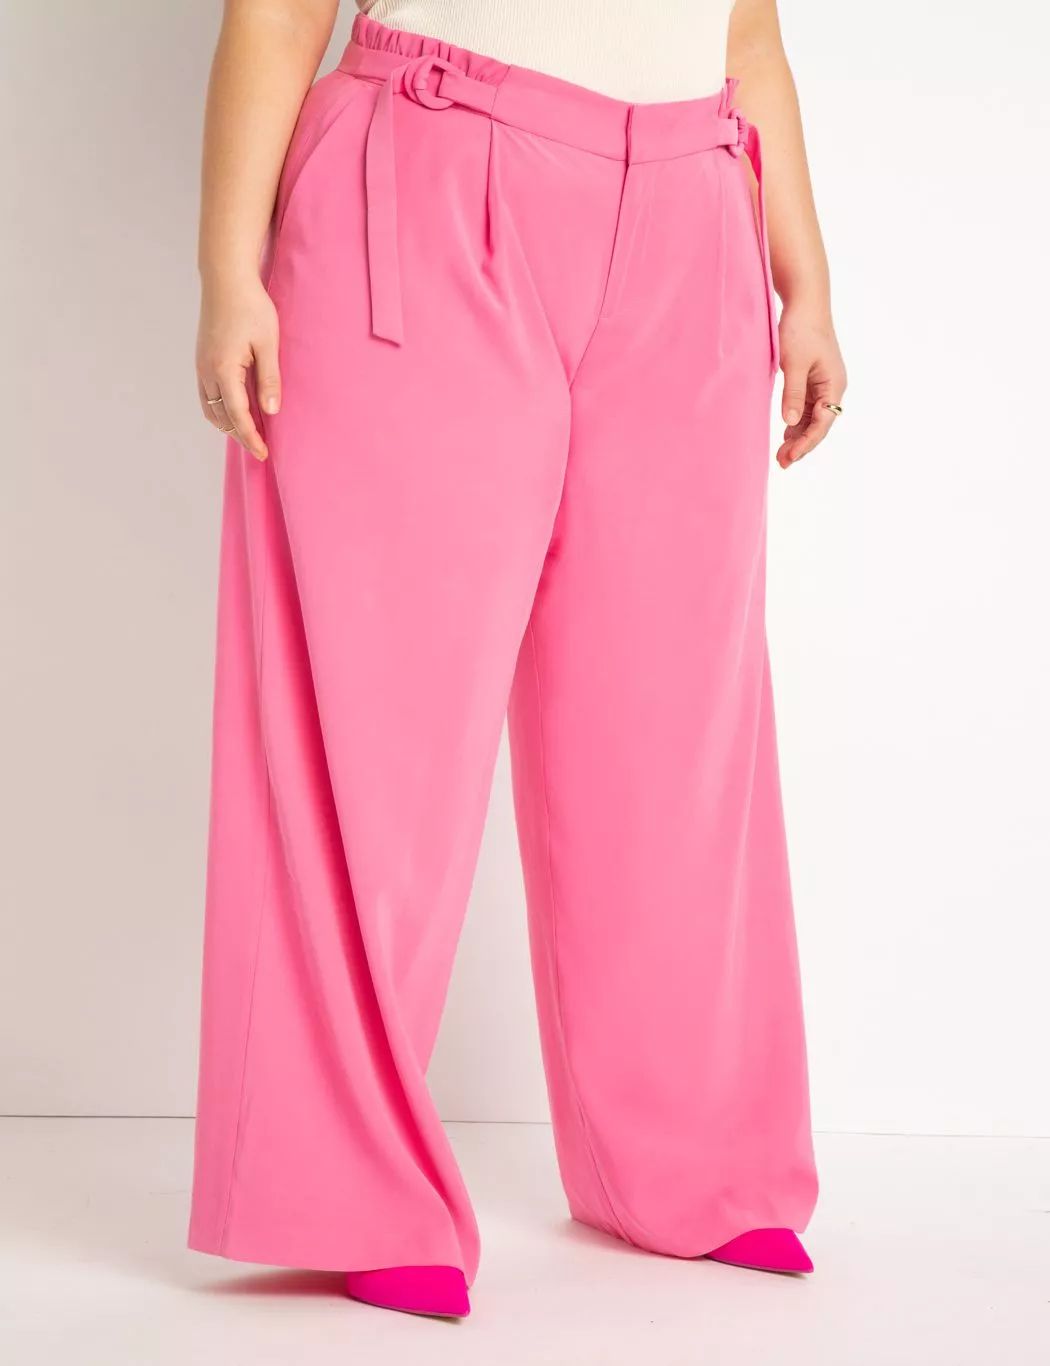 Cinched Waist Trousers | Eloquii